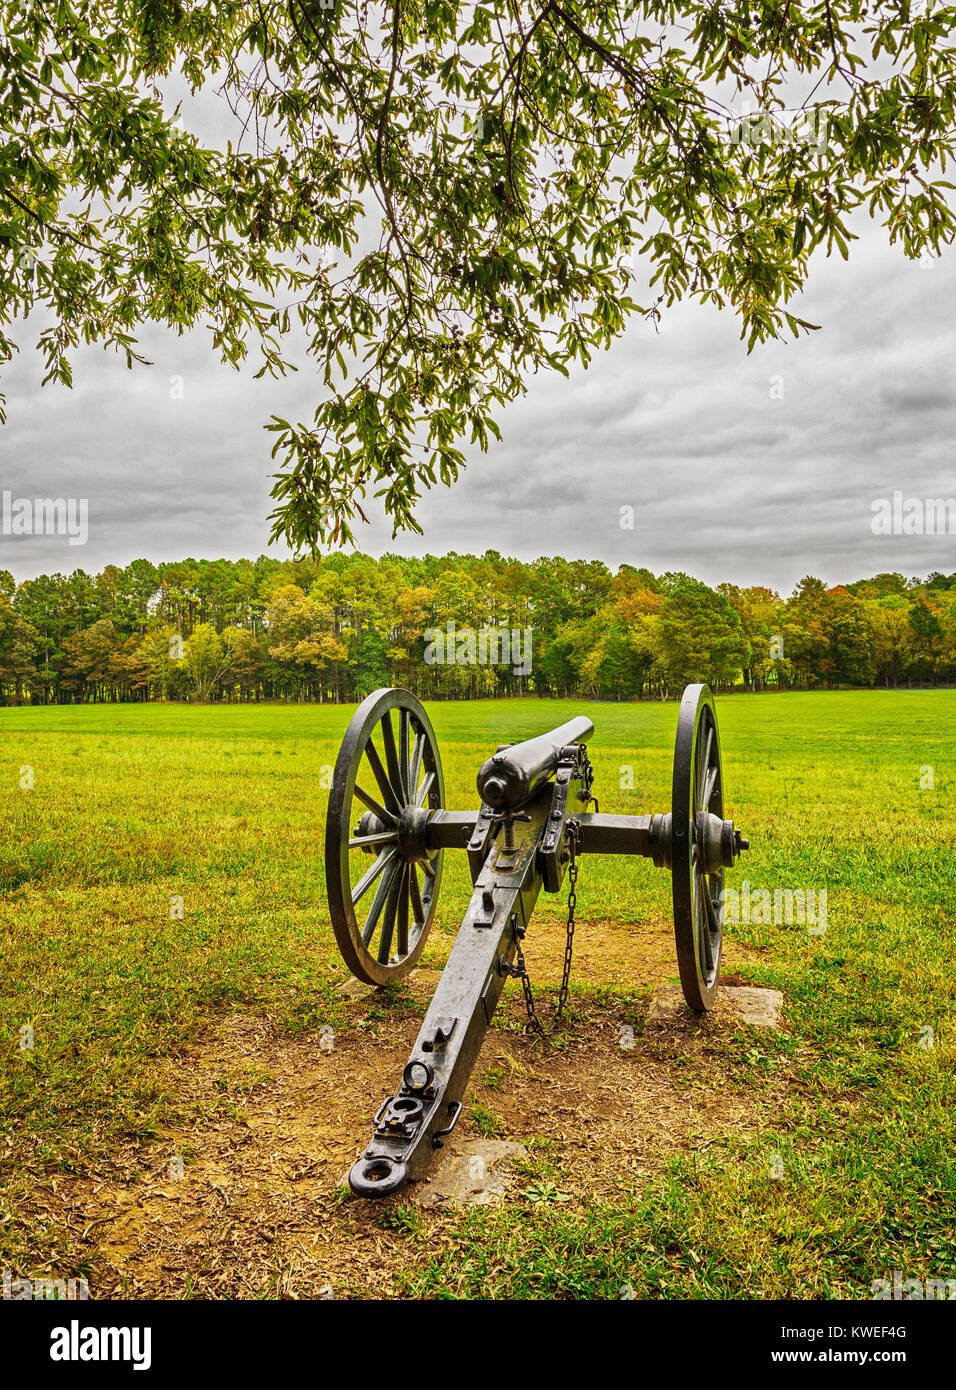 Chickamauga and Chattanooga National Military Park is located in Georgia and Tennessee and was one of the most decisive battles of the Civil War. Stock Photo